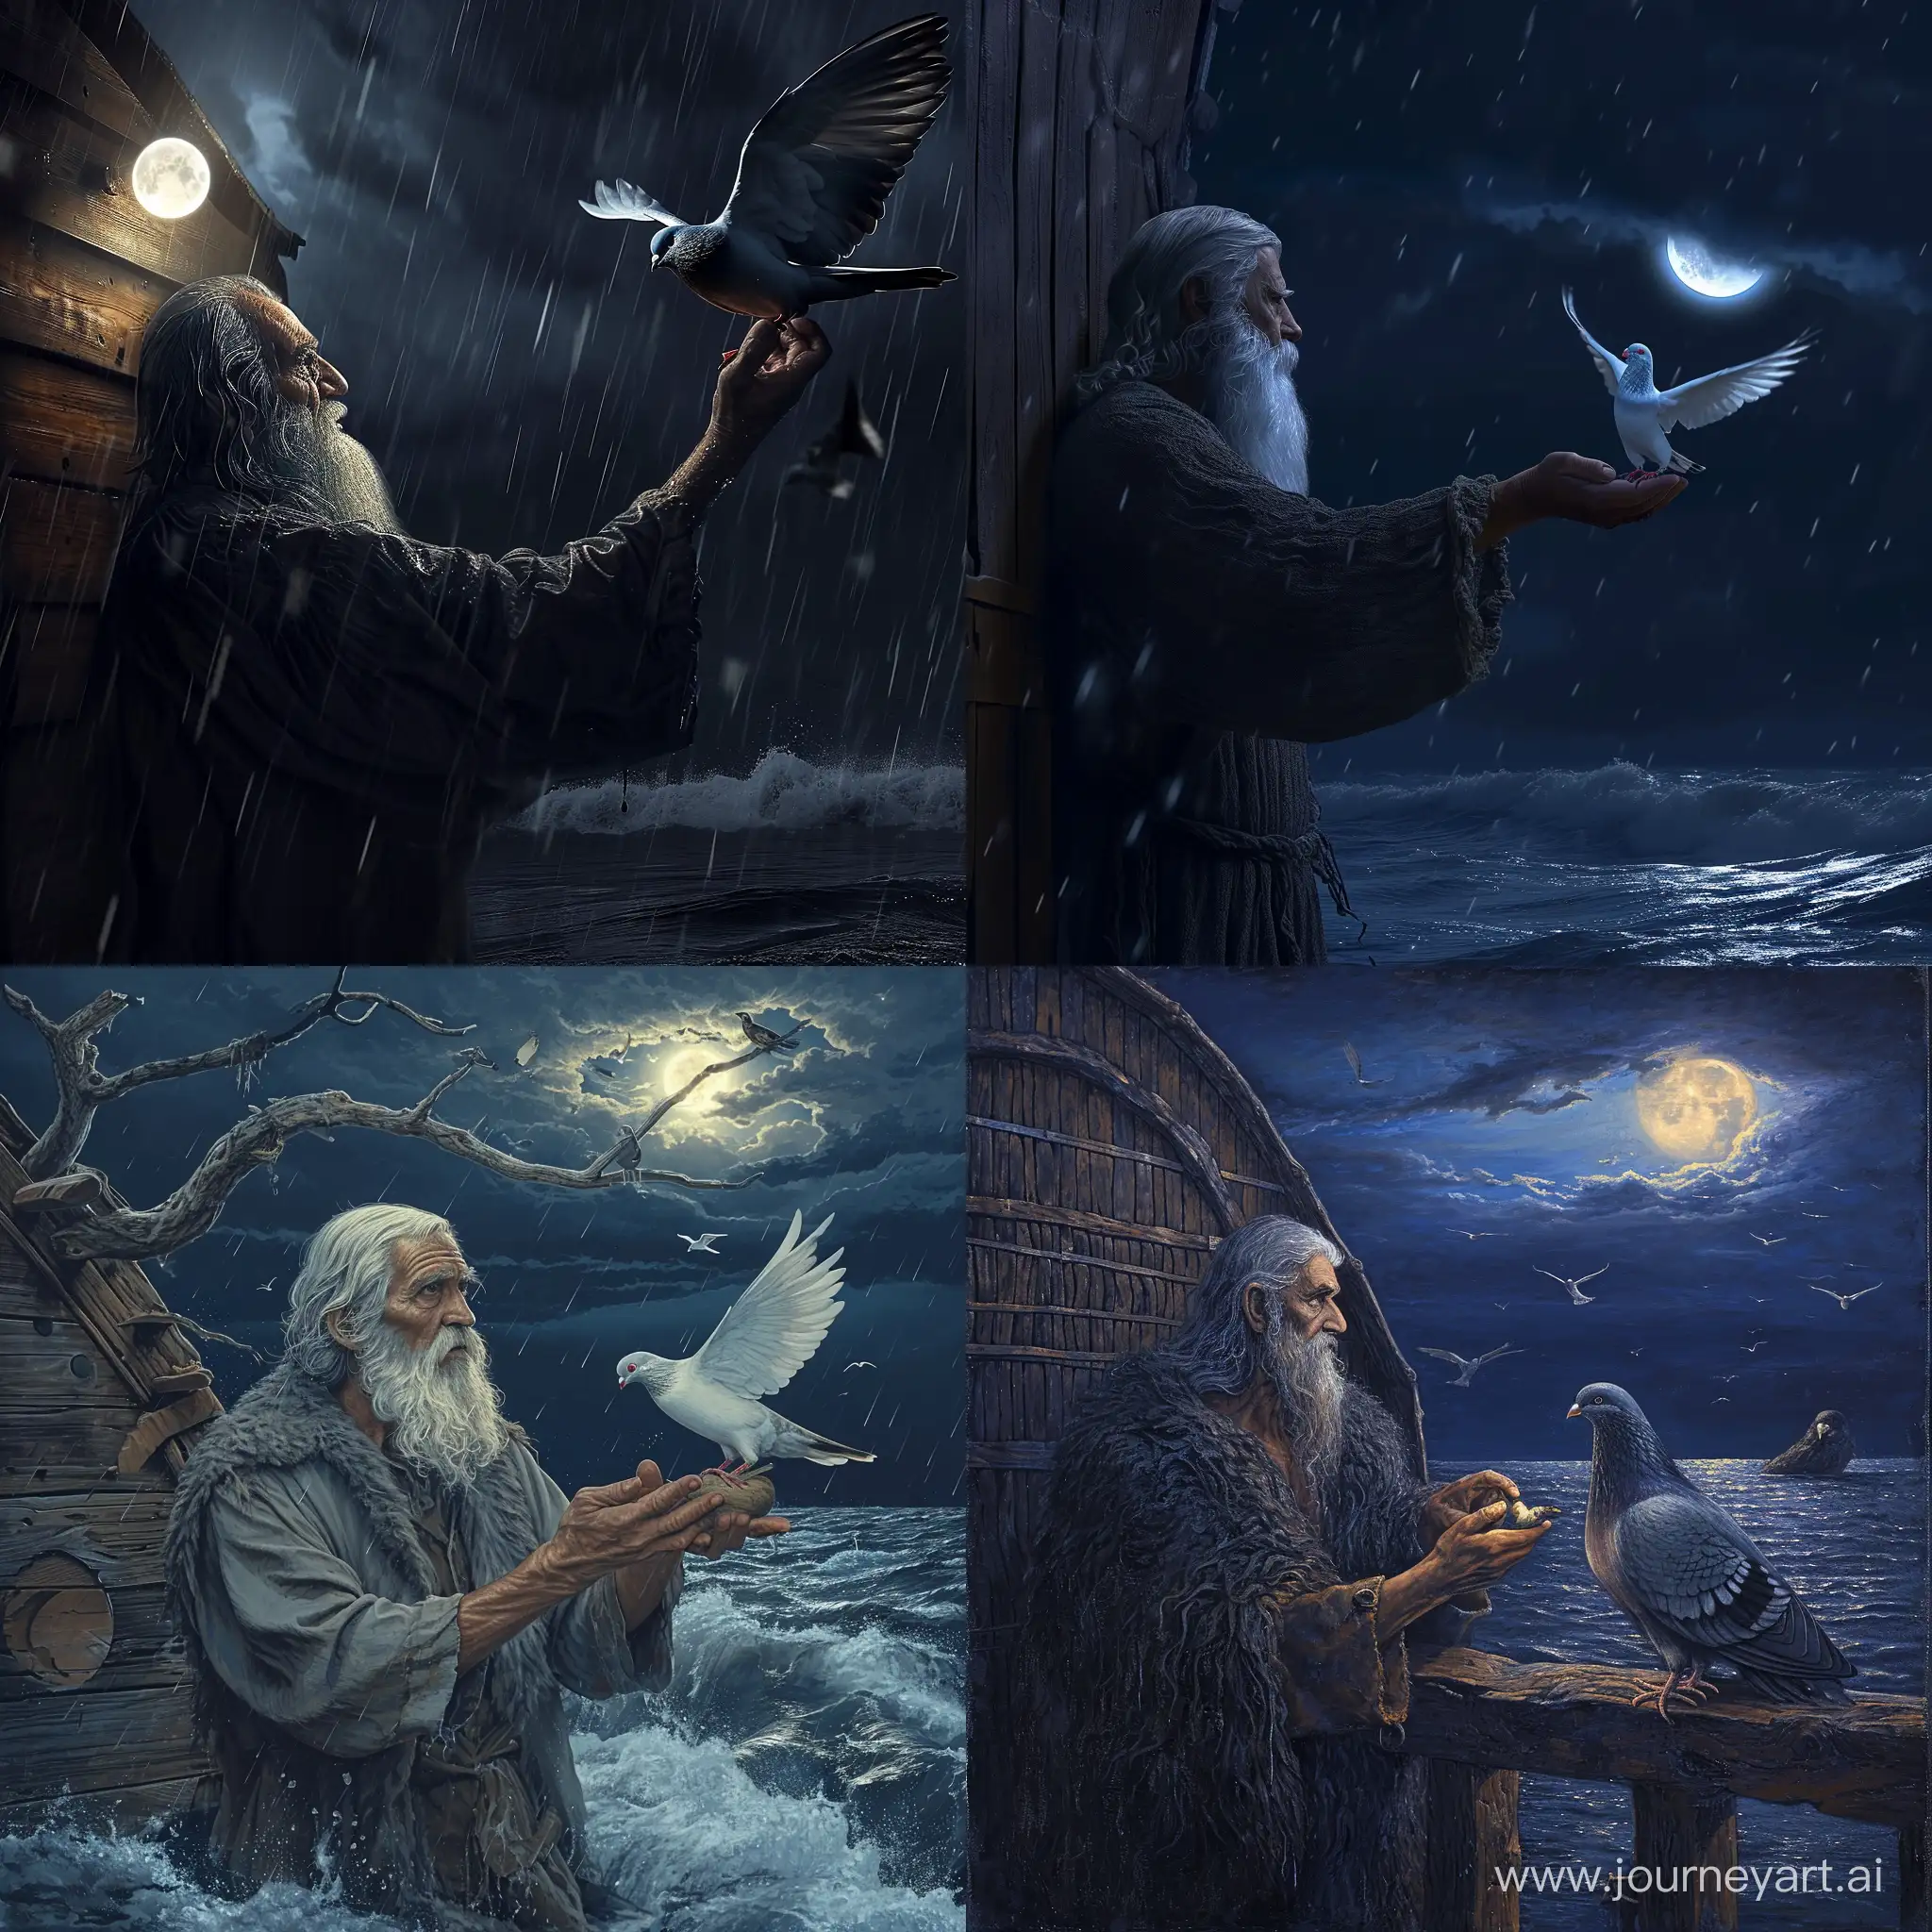 Noahs-Hopeful-Night-Wise-Man-in-the-Great-Ark-Sends-Pigeon-Amidst-the-Flood